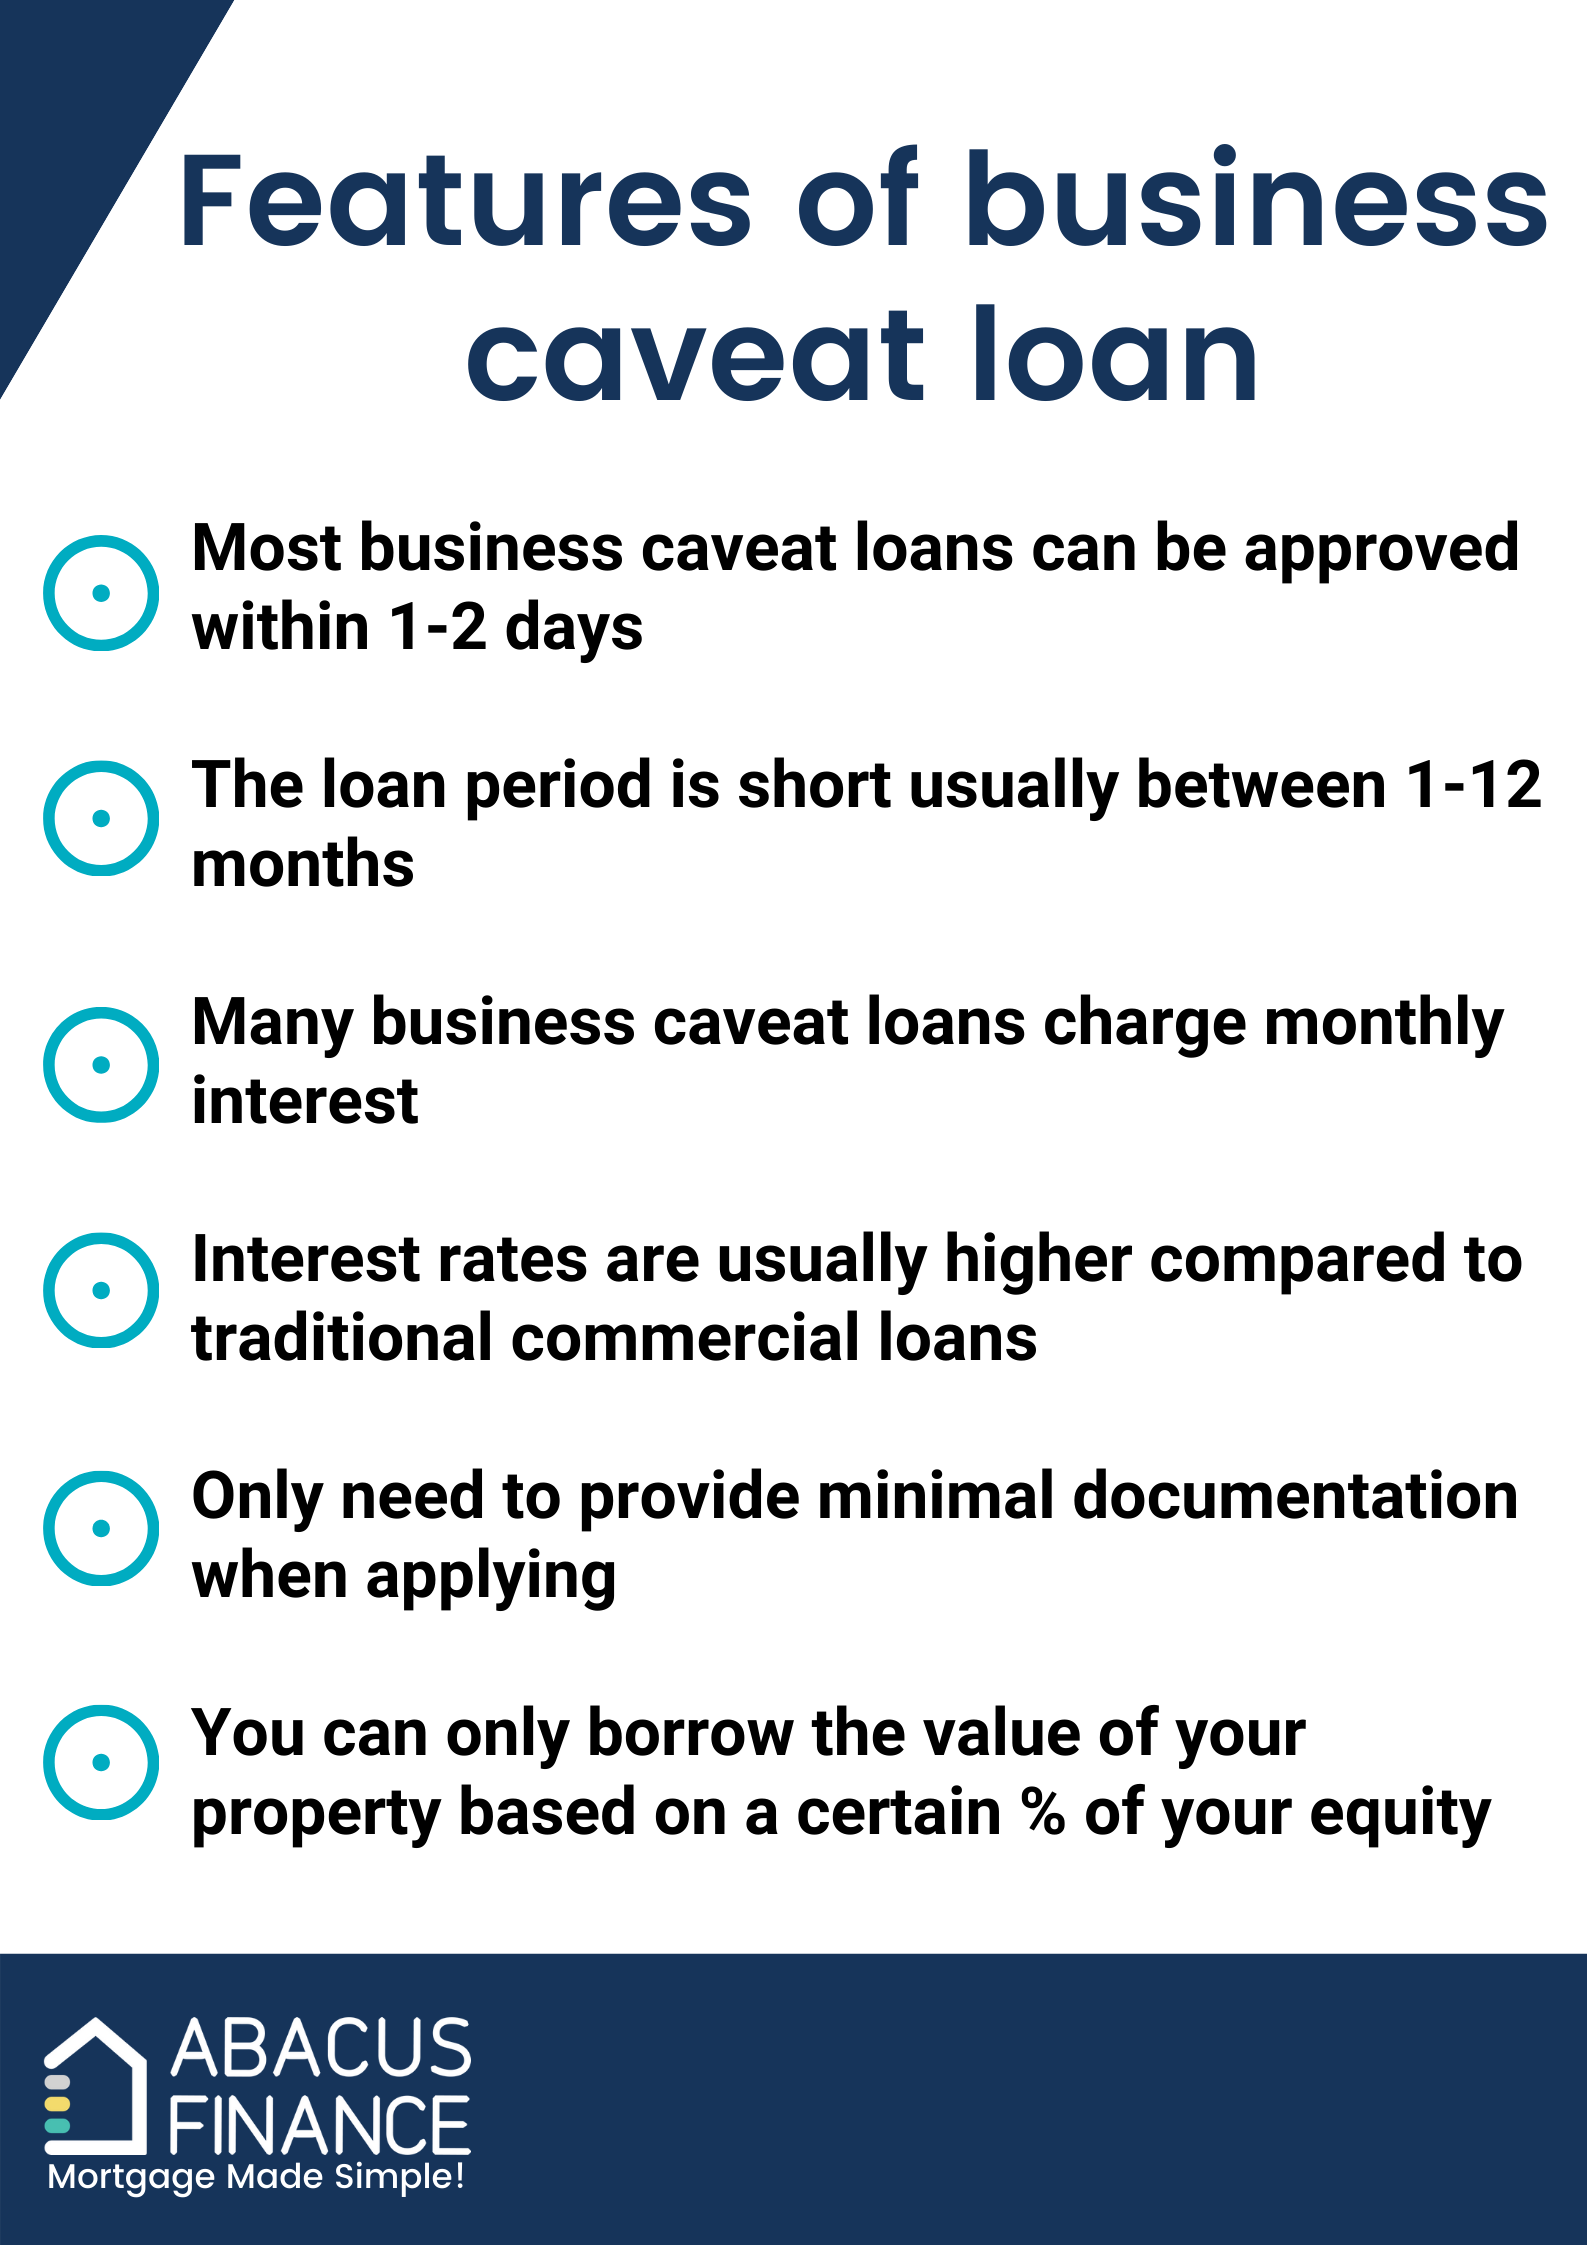 Features of a business caveat loan